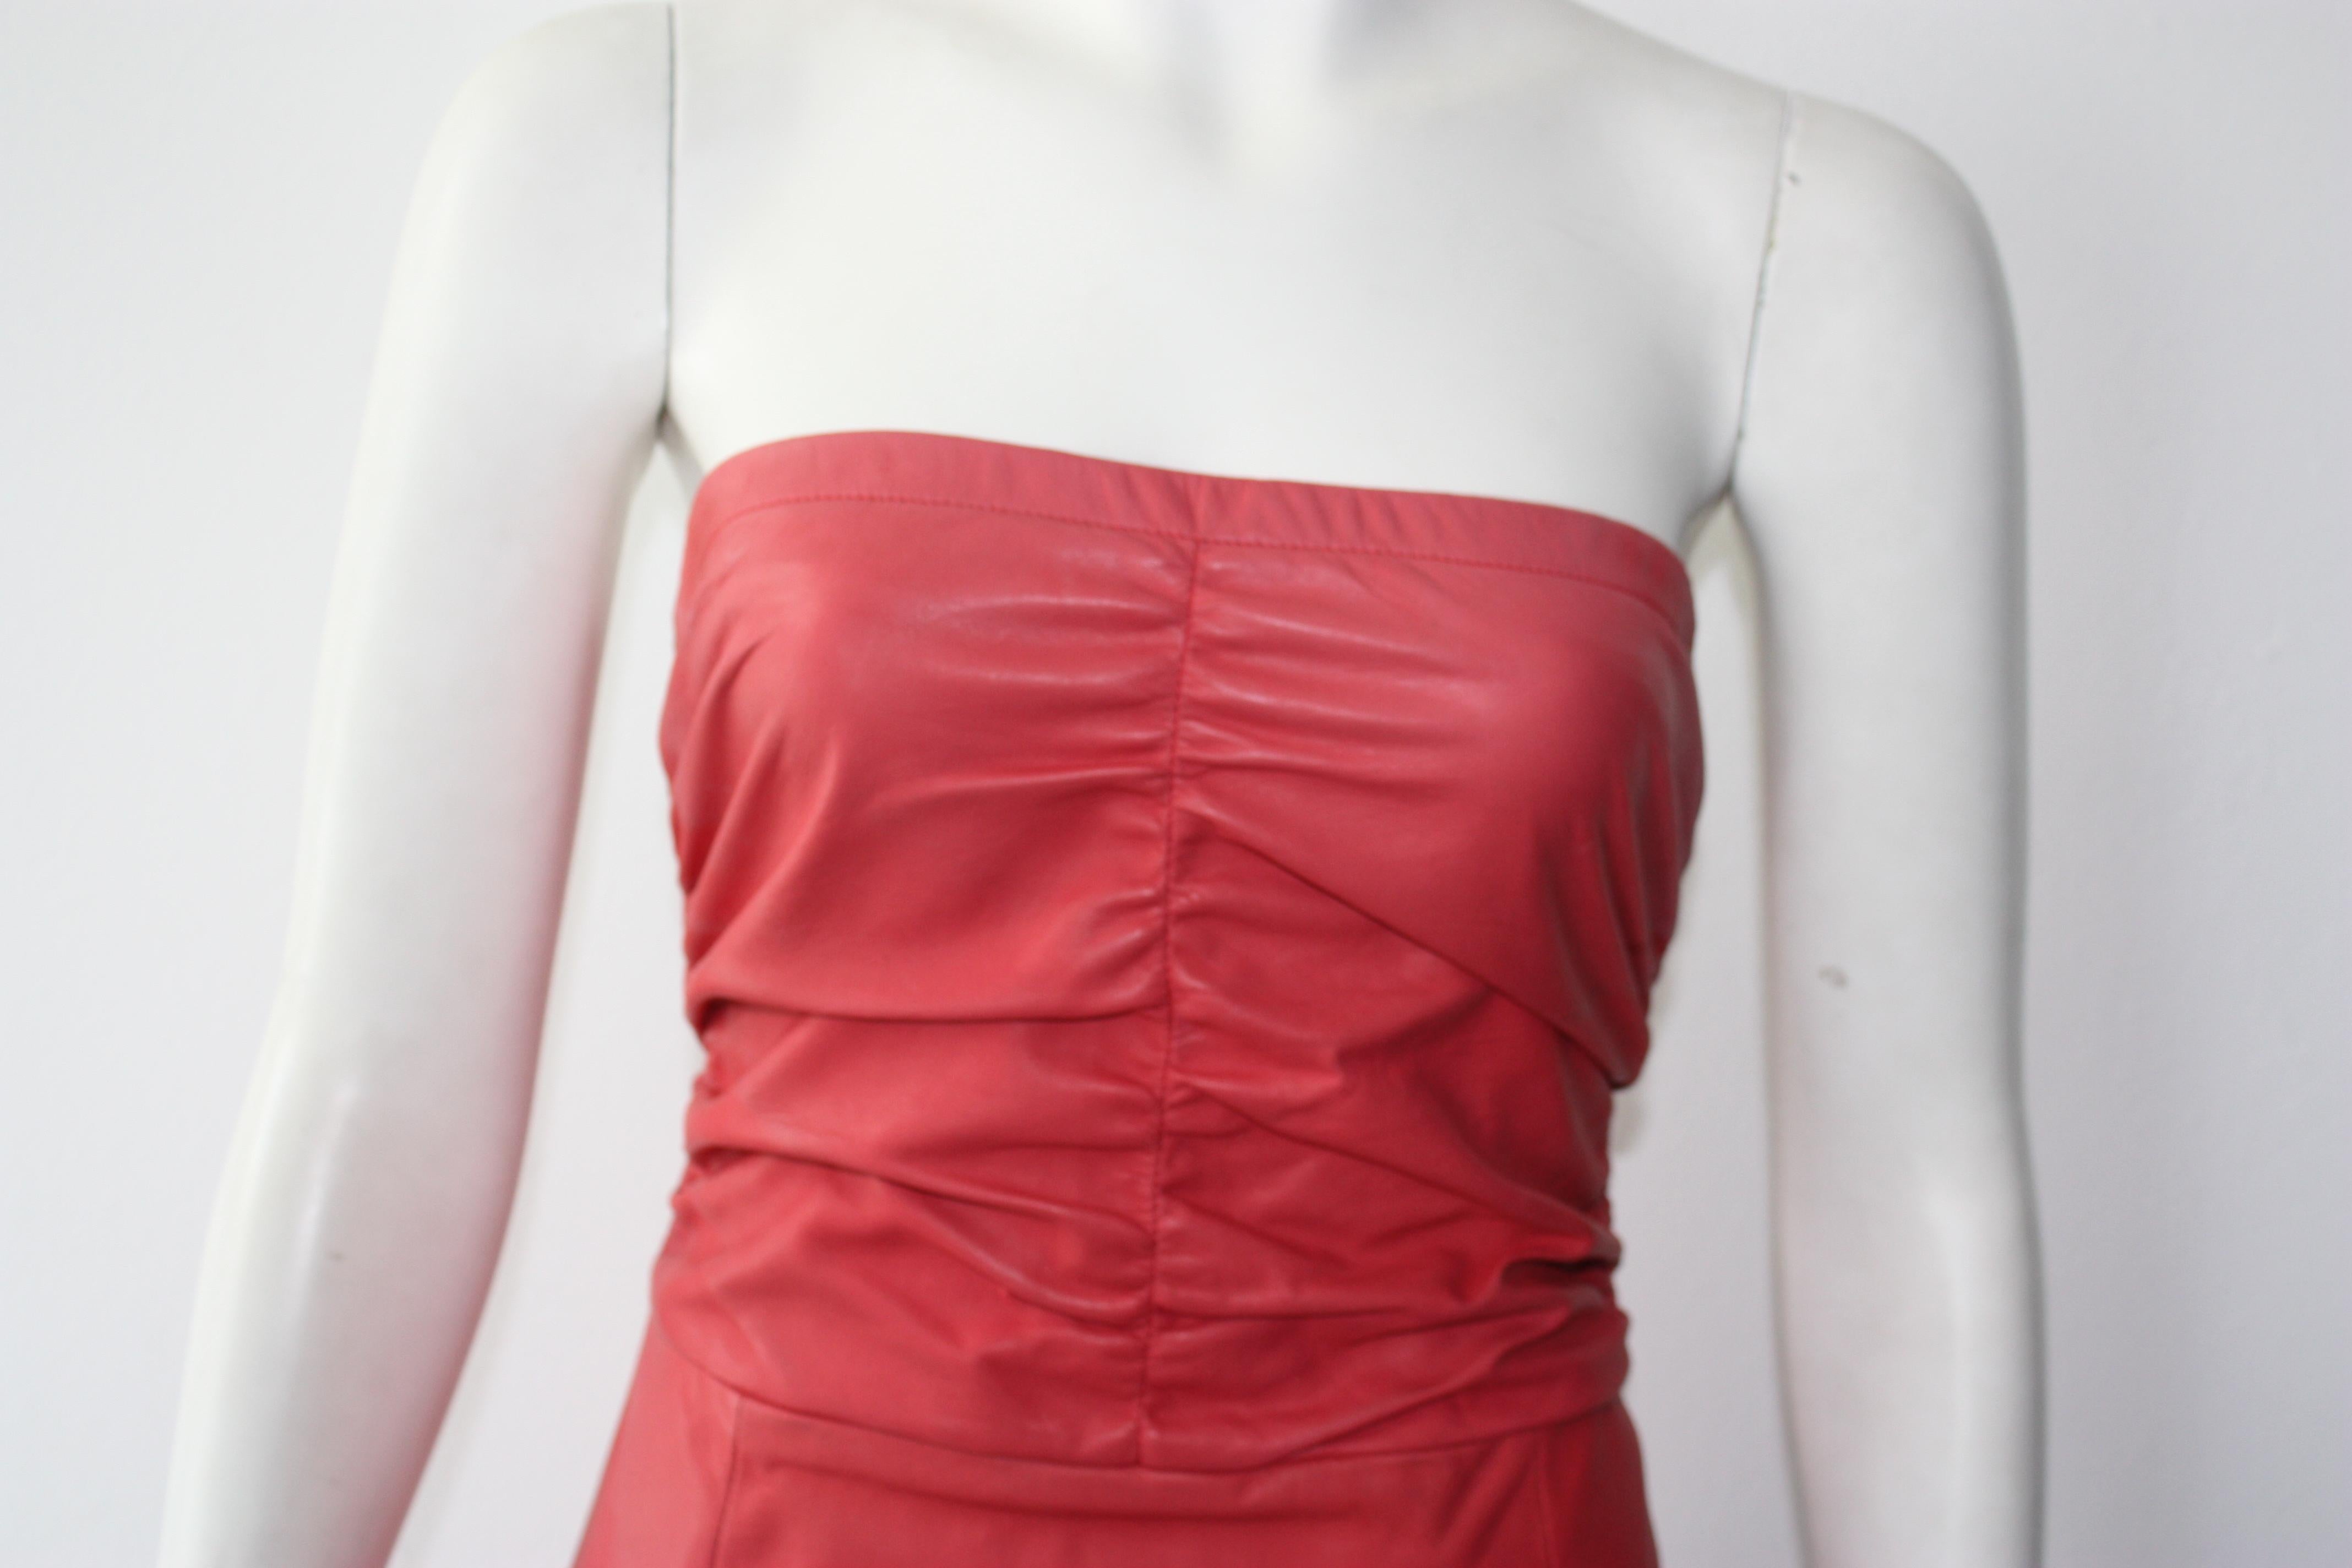 DROMe strapless pink dress. 
Color is in between a coral and a pink . Super fun! 
100% leather. Lining 68% acetate, 32% polyester.

Size S.